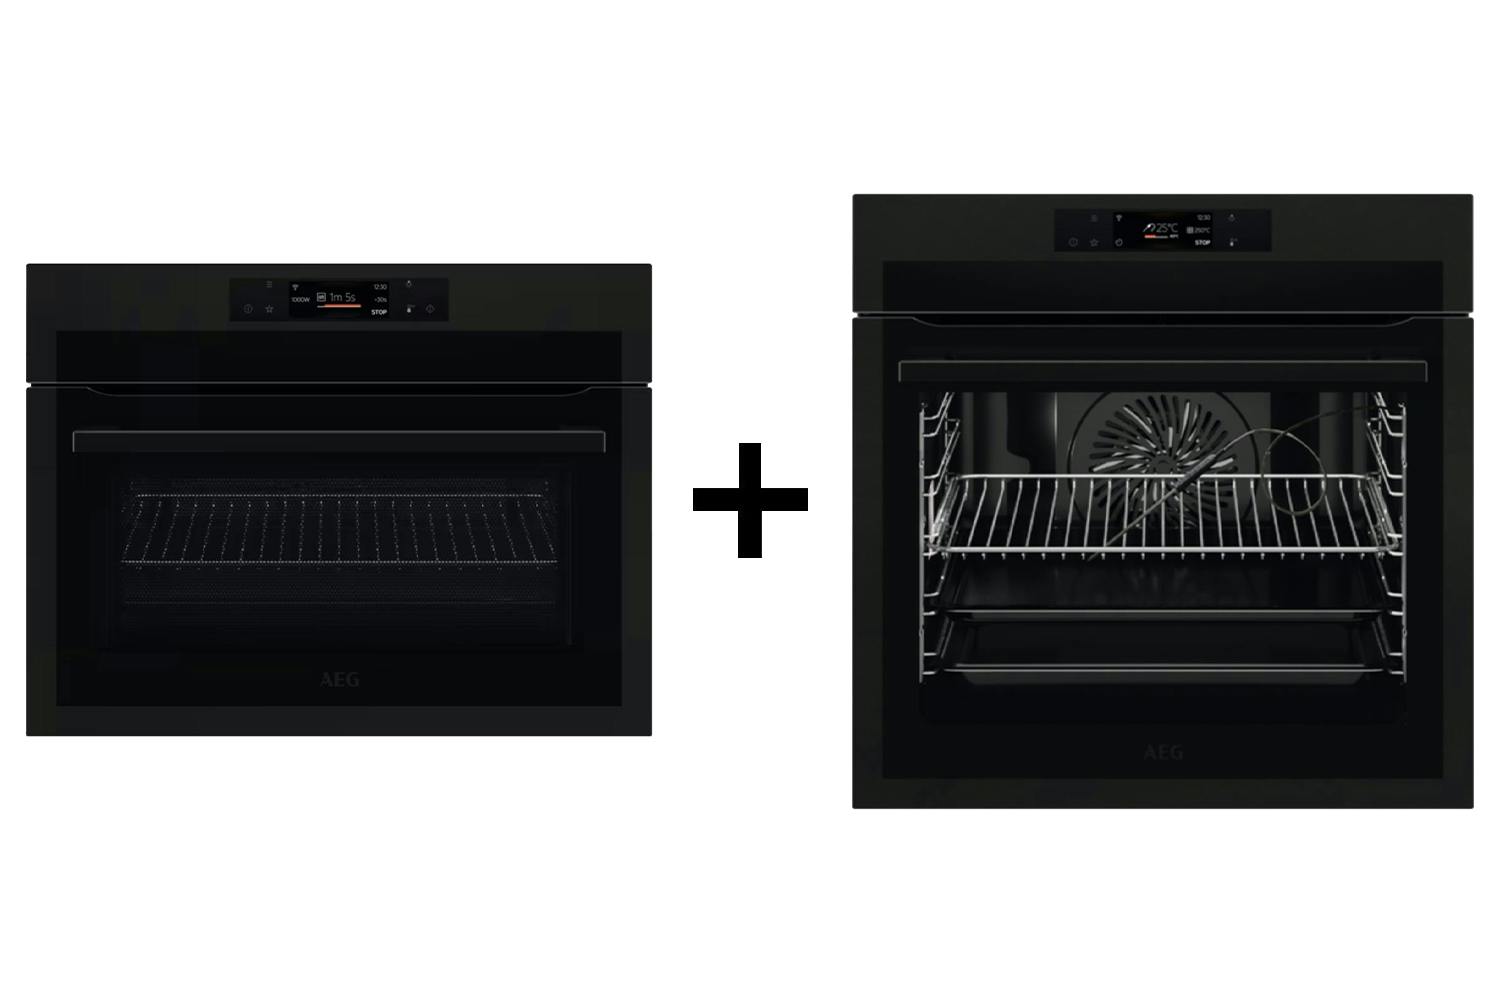 AEG 8000 Series Built-in Single Integrated CombiQuick Microwave Oven and Built-in Electric Single Oven Bundle